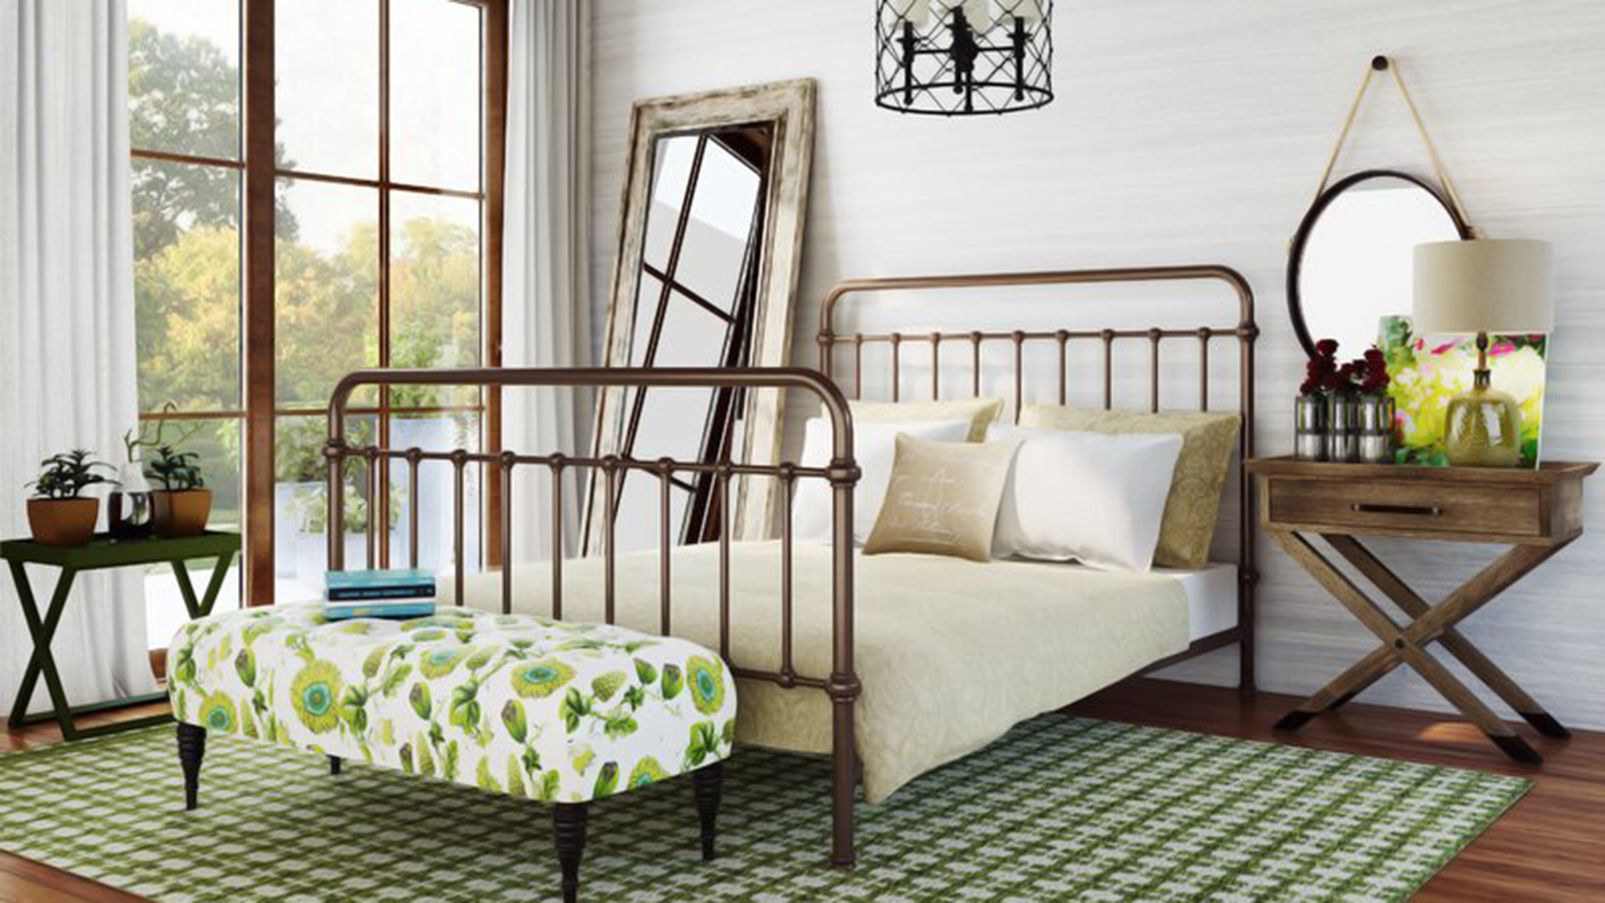 Bed Frames At Wayfair Cnn, Wayfair Double Bed Frame With Storage